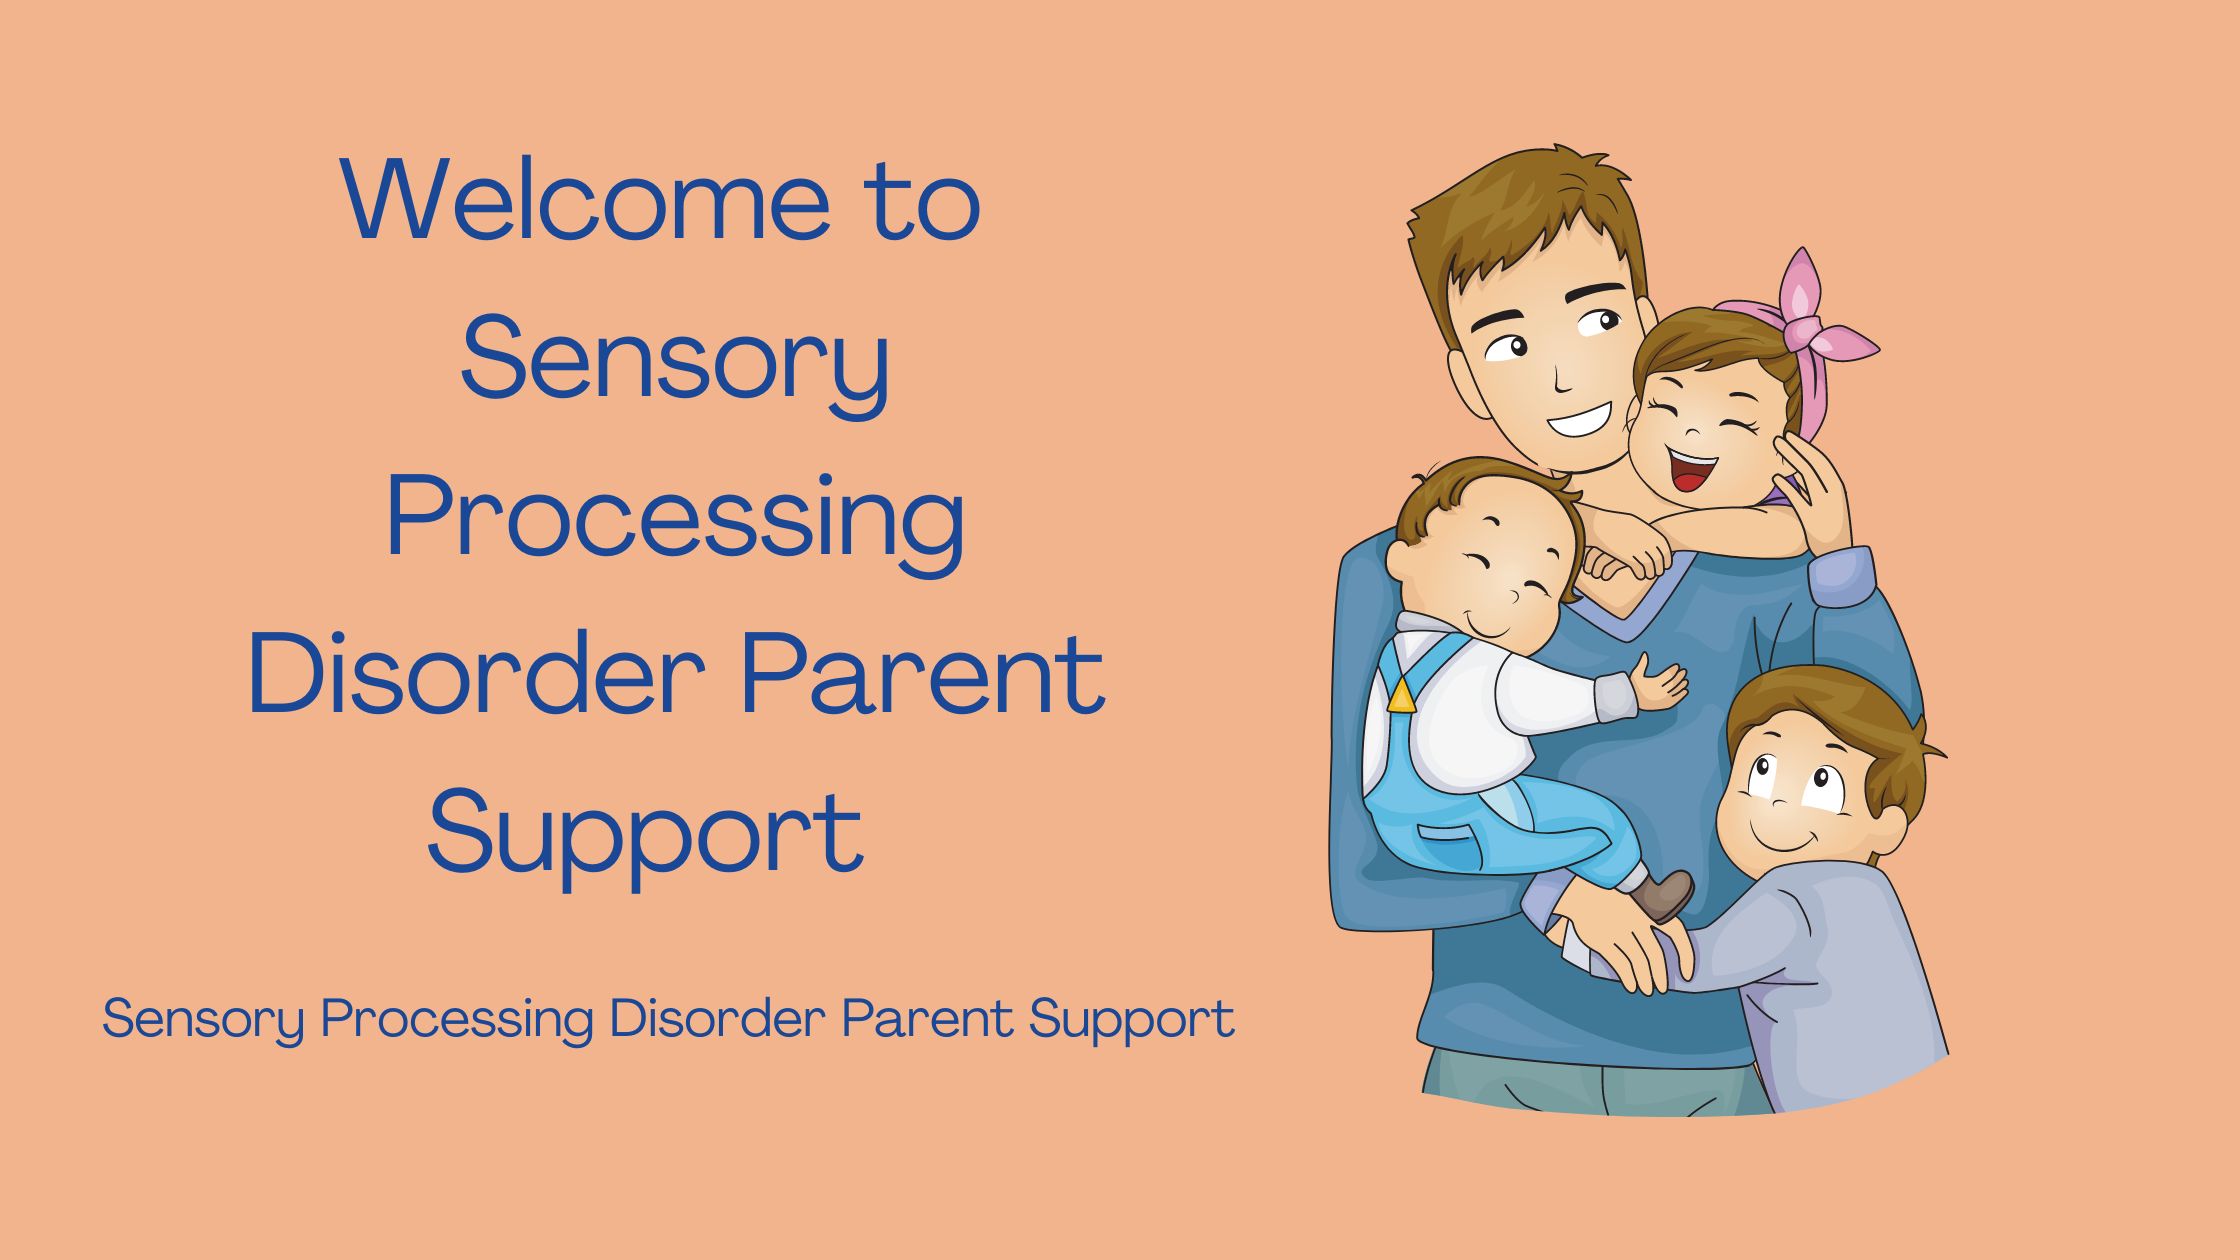 dad holding his children who have sensory processing disorder says welcome to sensory processing disorder parent support